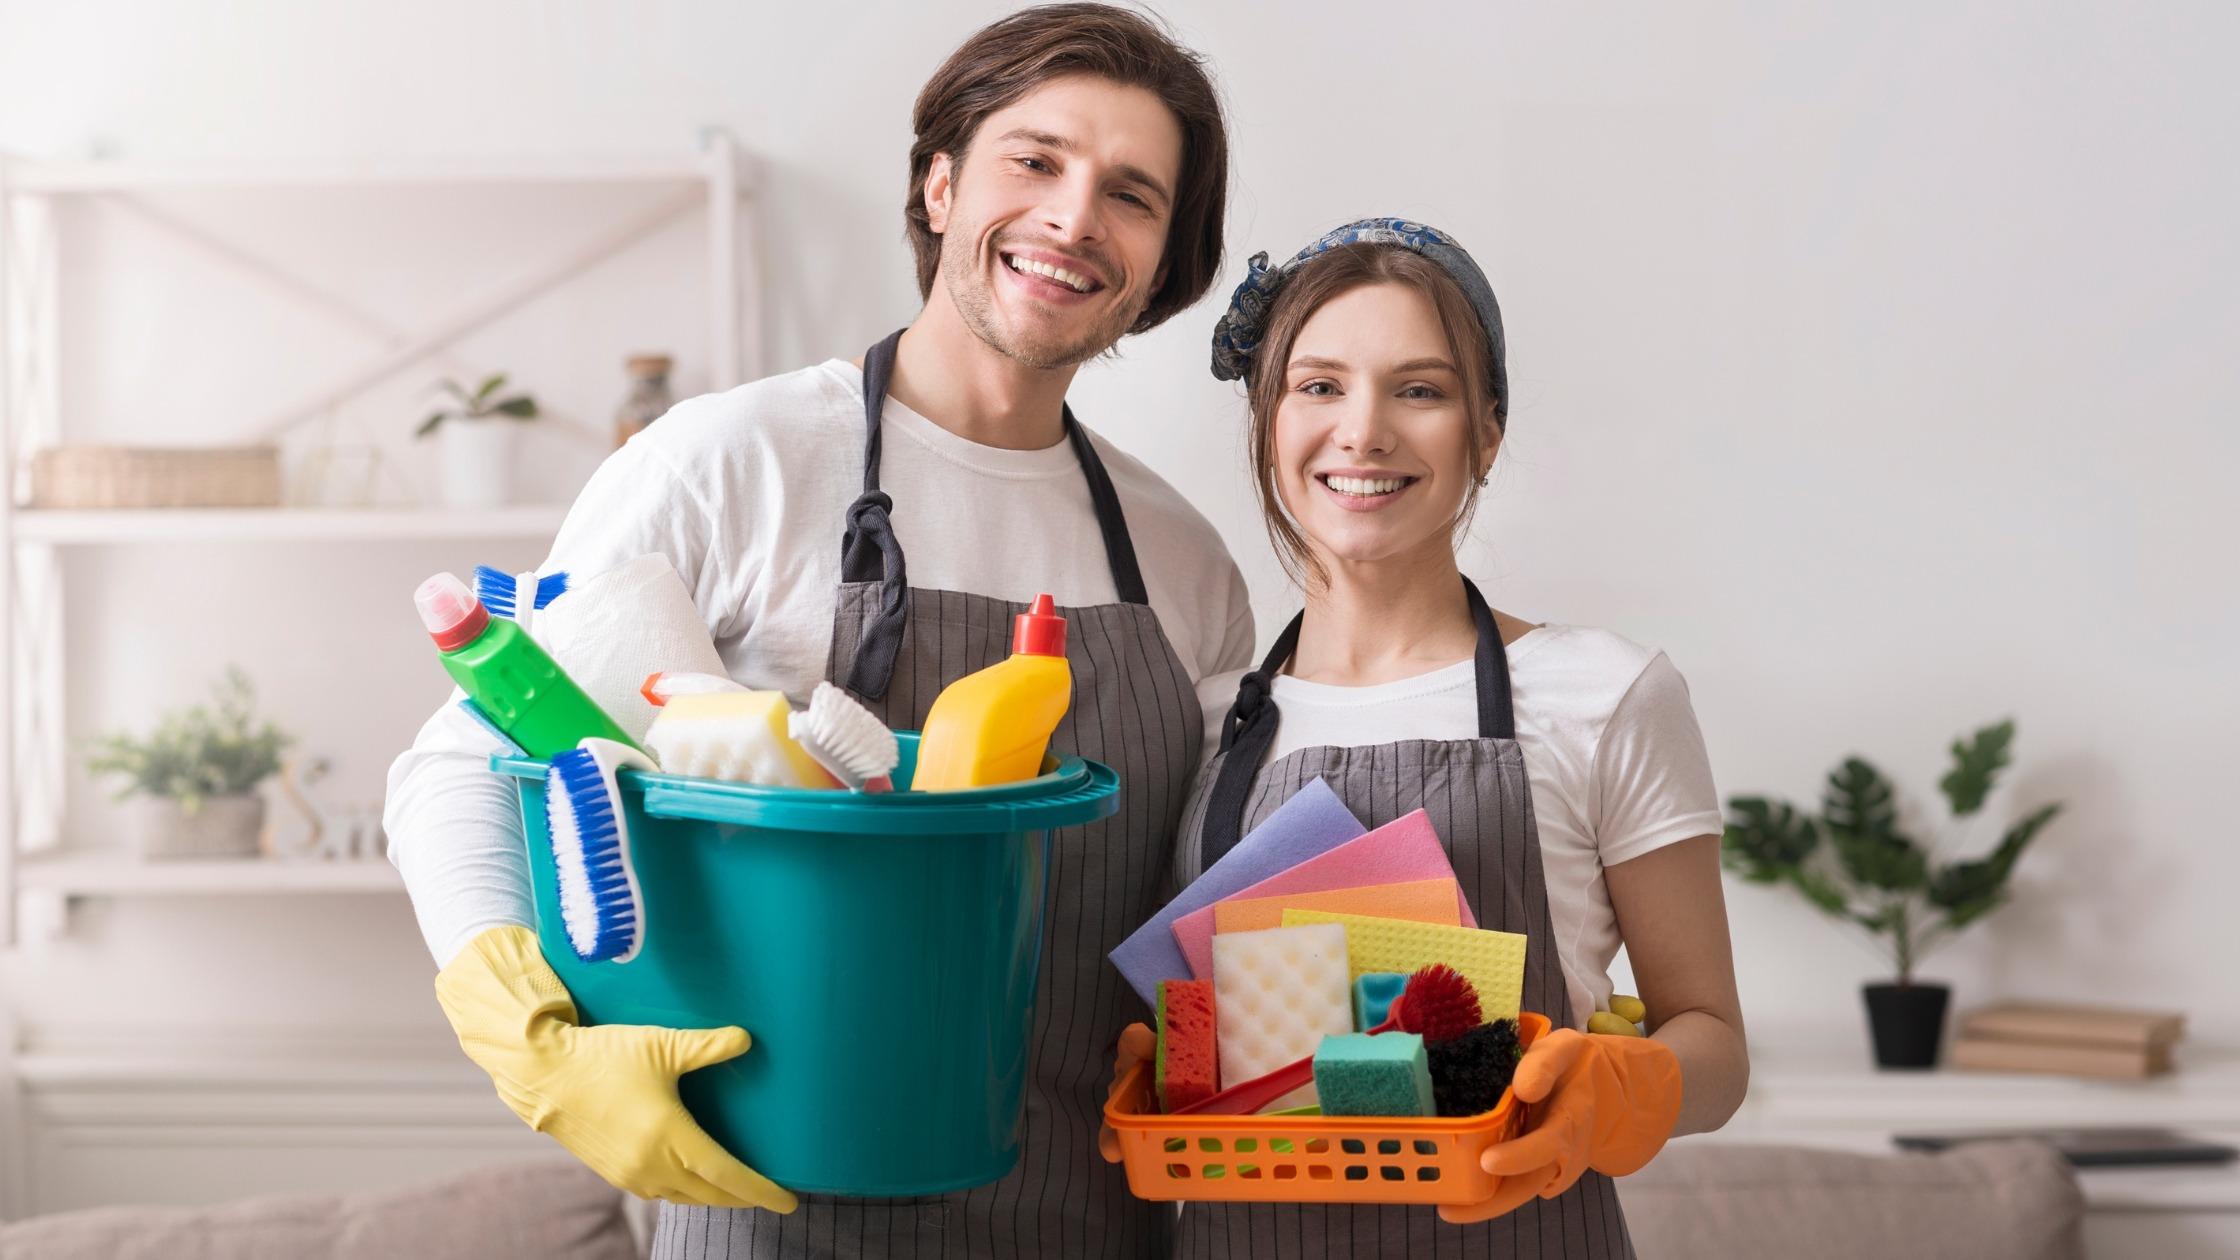 6 Reasons Why You Should Hire a Professional for Your Spring Cleaning